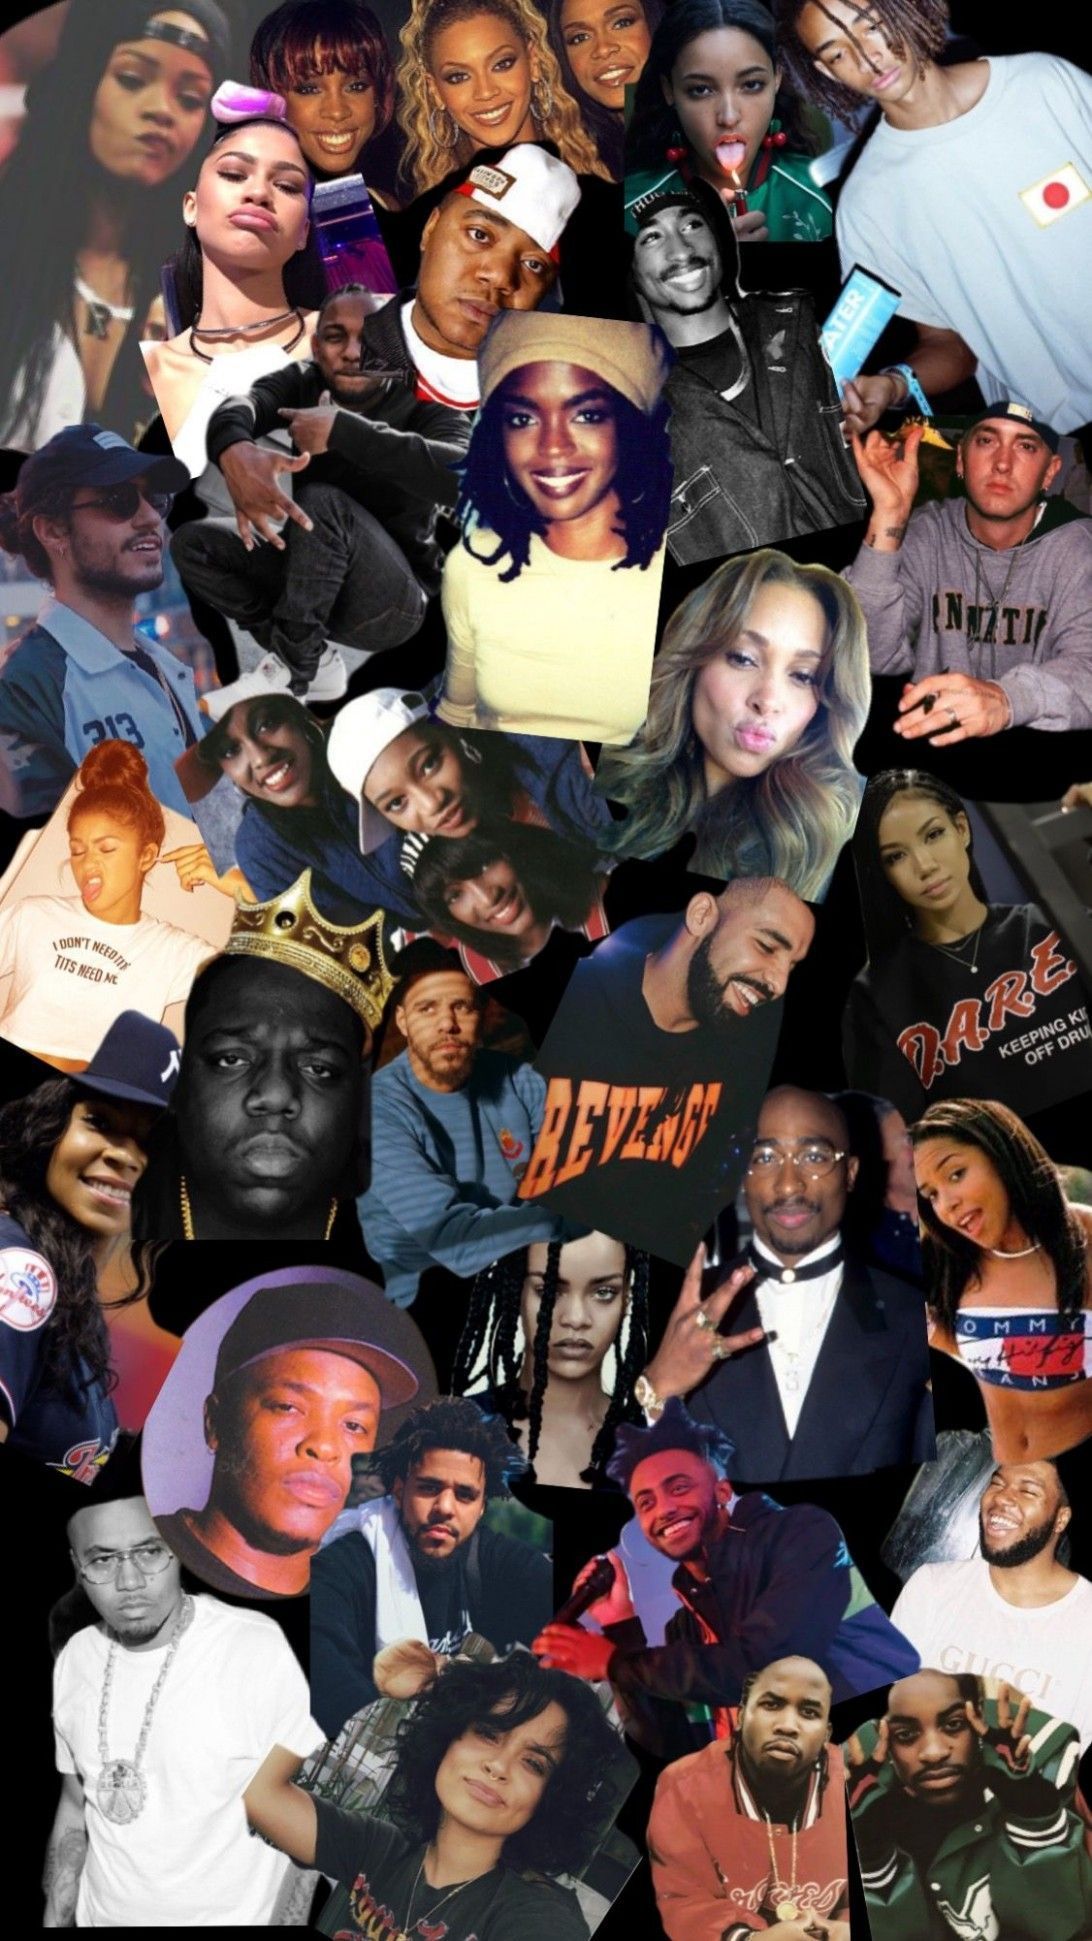 Aesthetic Wallpaper 5s Rappers Five Lessons That Will Teach You All You Need To Know About. Tupac wallpaper, Aesthetic wallpaper, Rap wallpaper